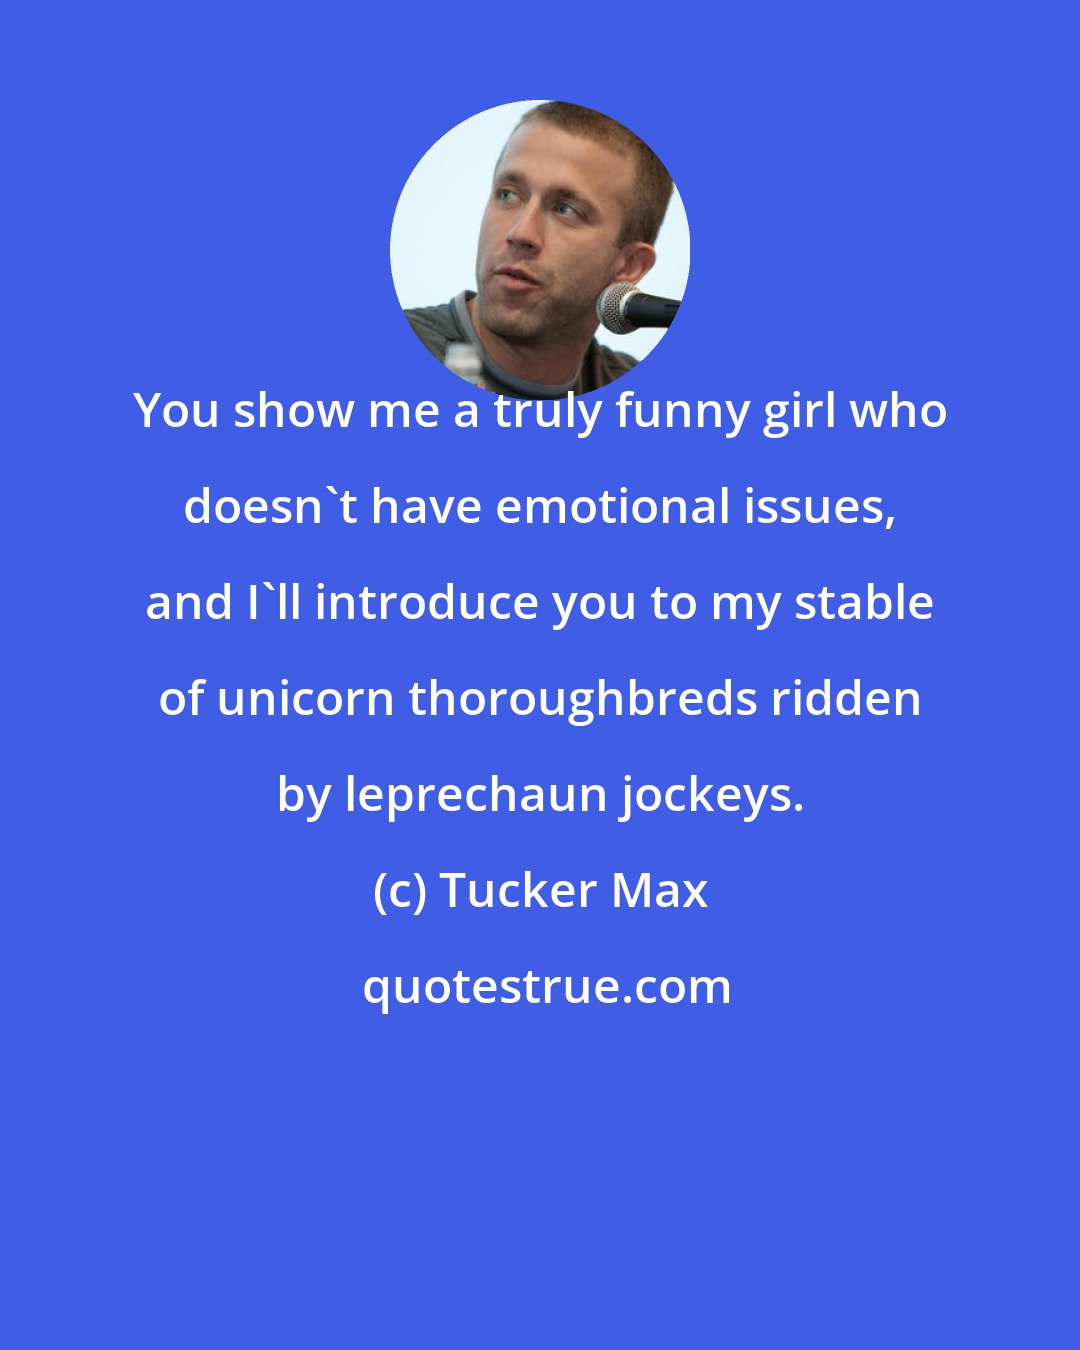 Tucker Max: You show me a truly funny girl who doesn't have emotional issues, and I'll introduce you to my stable of unicorn thoroughbreds ridden by leprechaun jockeys.